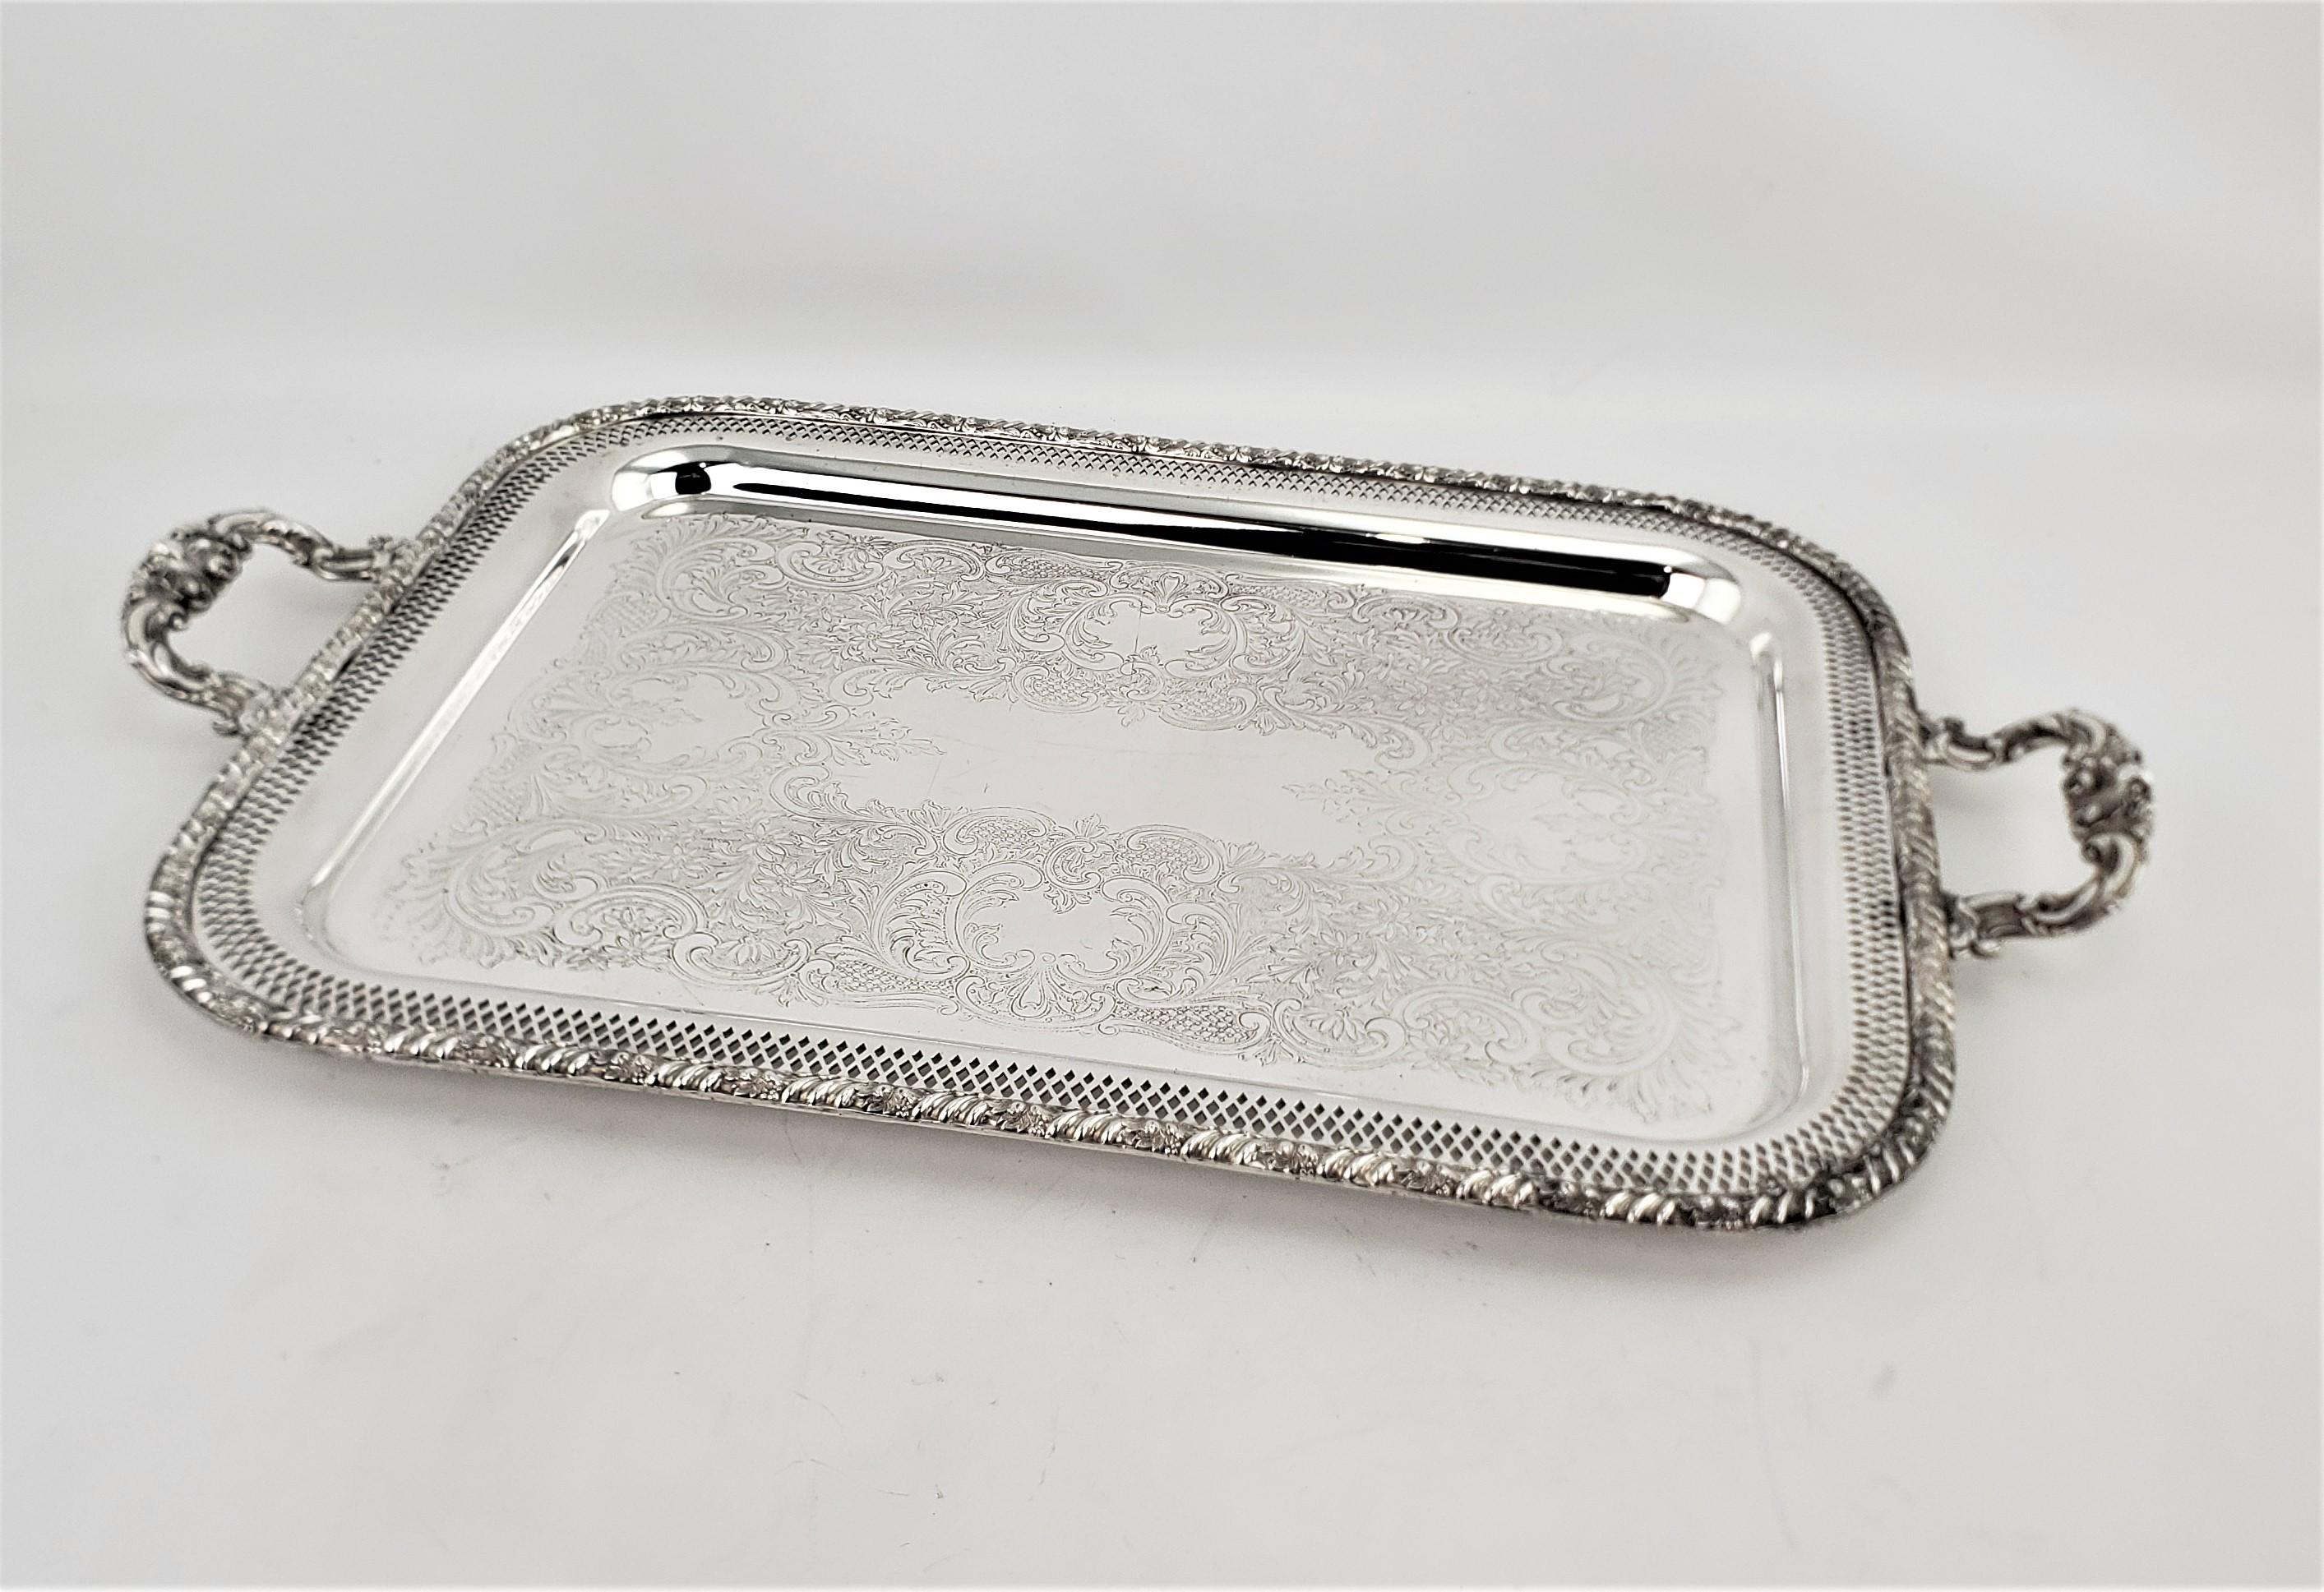 This large antique silver plated serving tray is signed by an unknown maker and presumed to have originated from England and dating to approximately 1920 and done in a Victorian style. The outside rim is decorated with a leaf and flower motif and